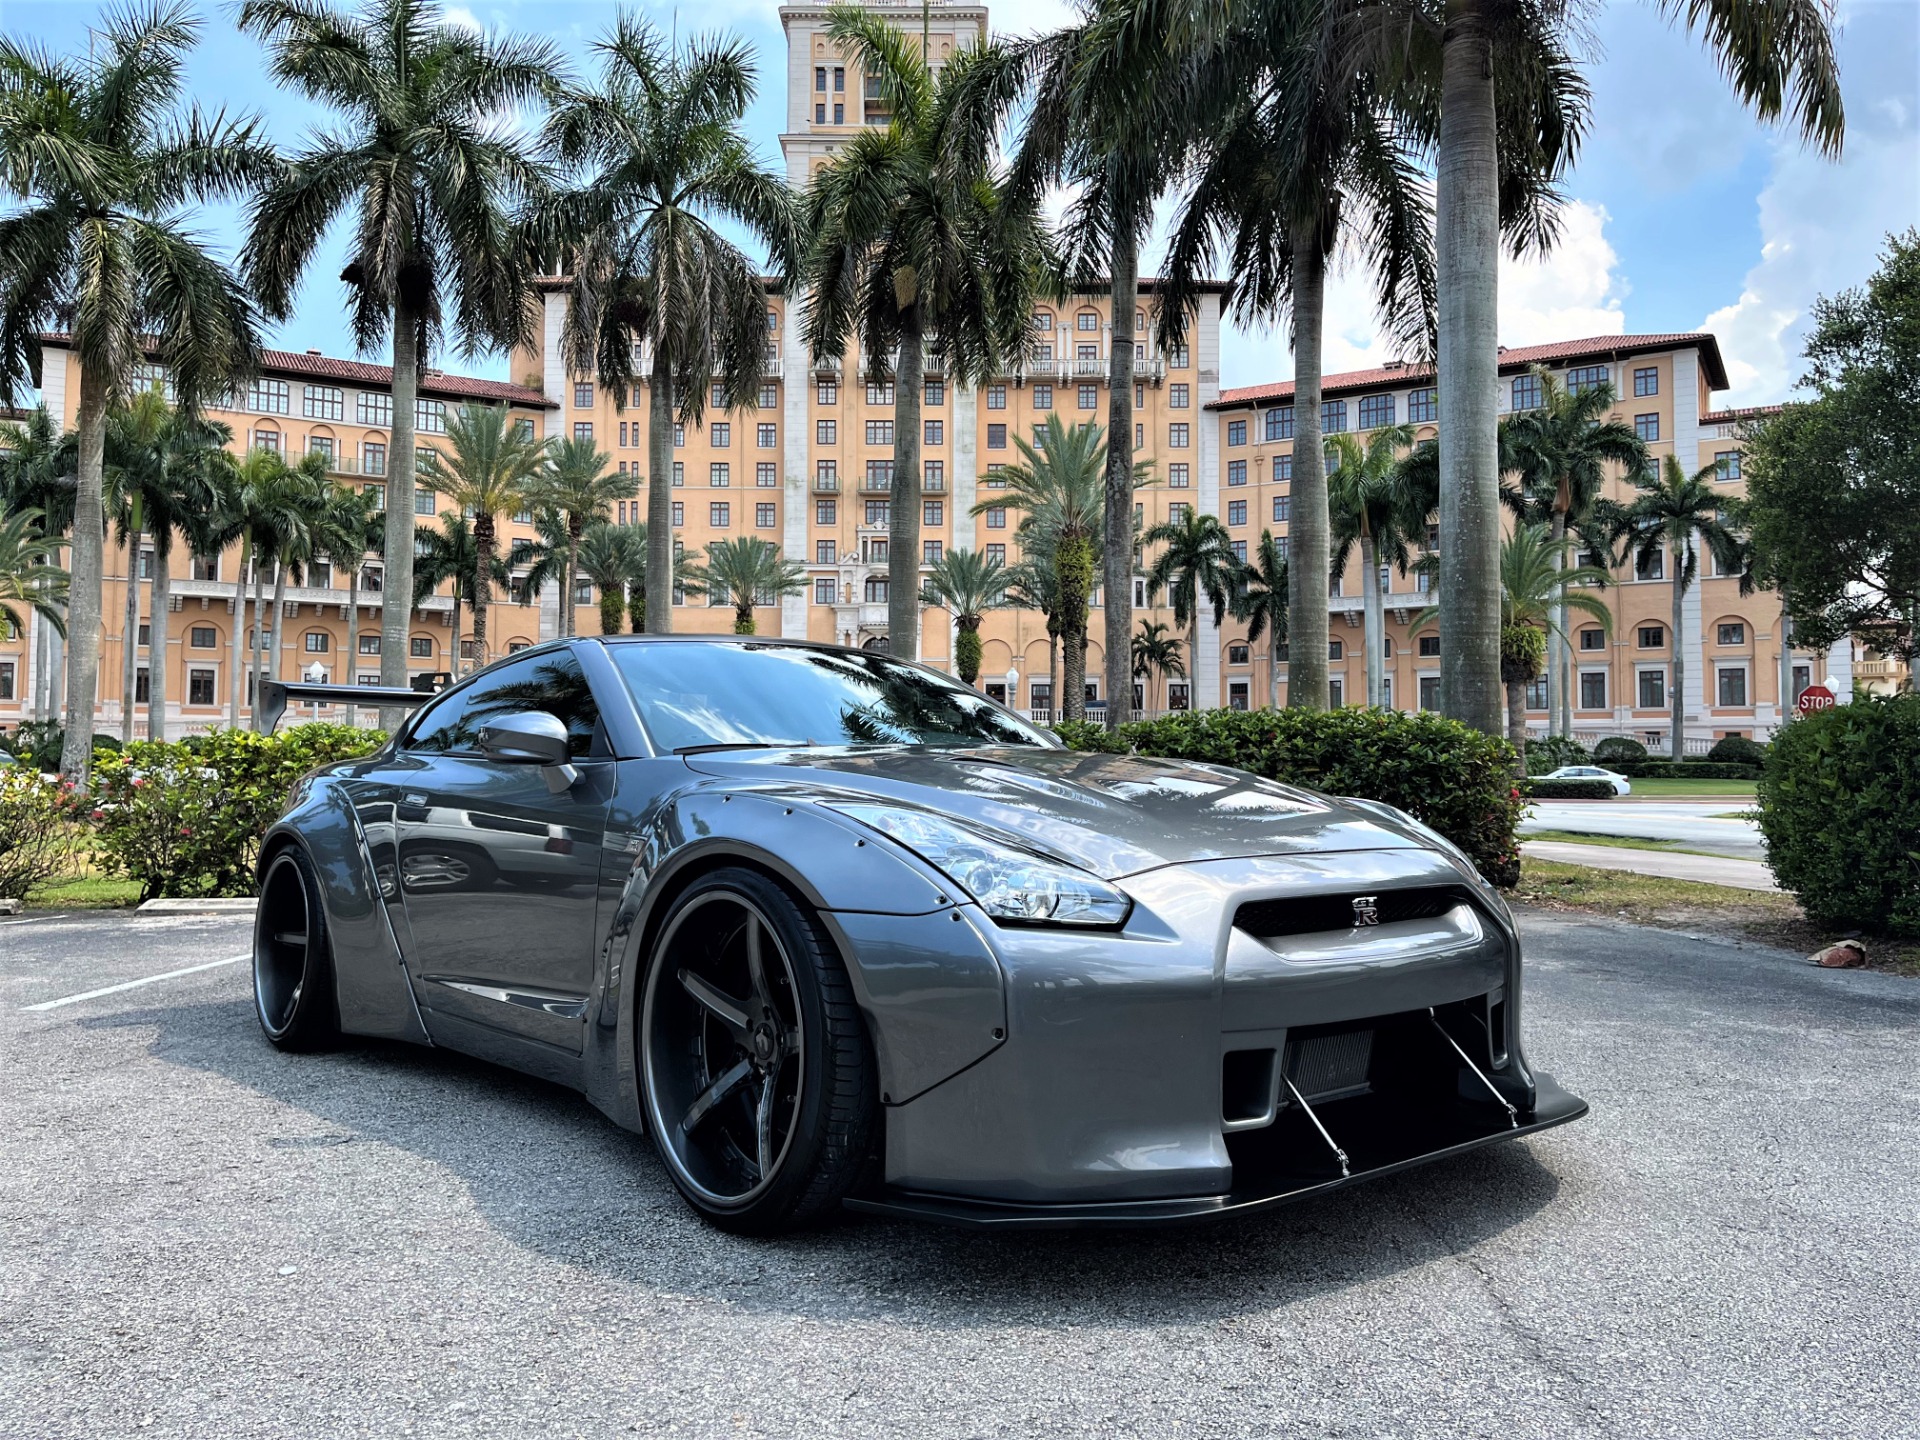 Used 2014 Nissan GT-R Track Edition for sale $149,850 at The Gables Sports Cars in Miami FL 33146 2